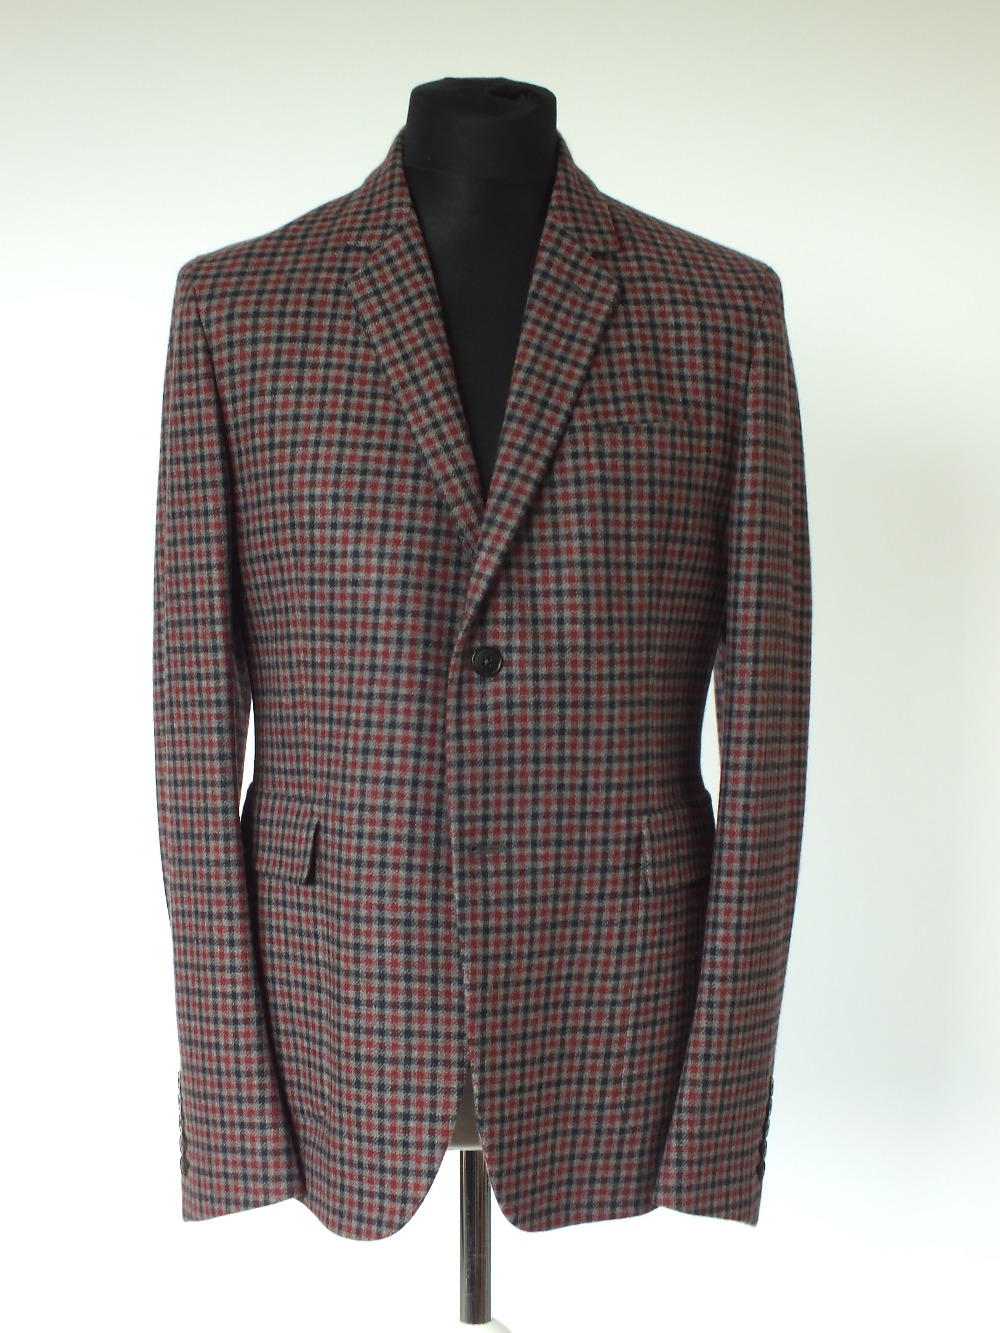 A Gucci jacket, red, grey and navy check, double vented, half lined, Italian size 52R, 100%